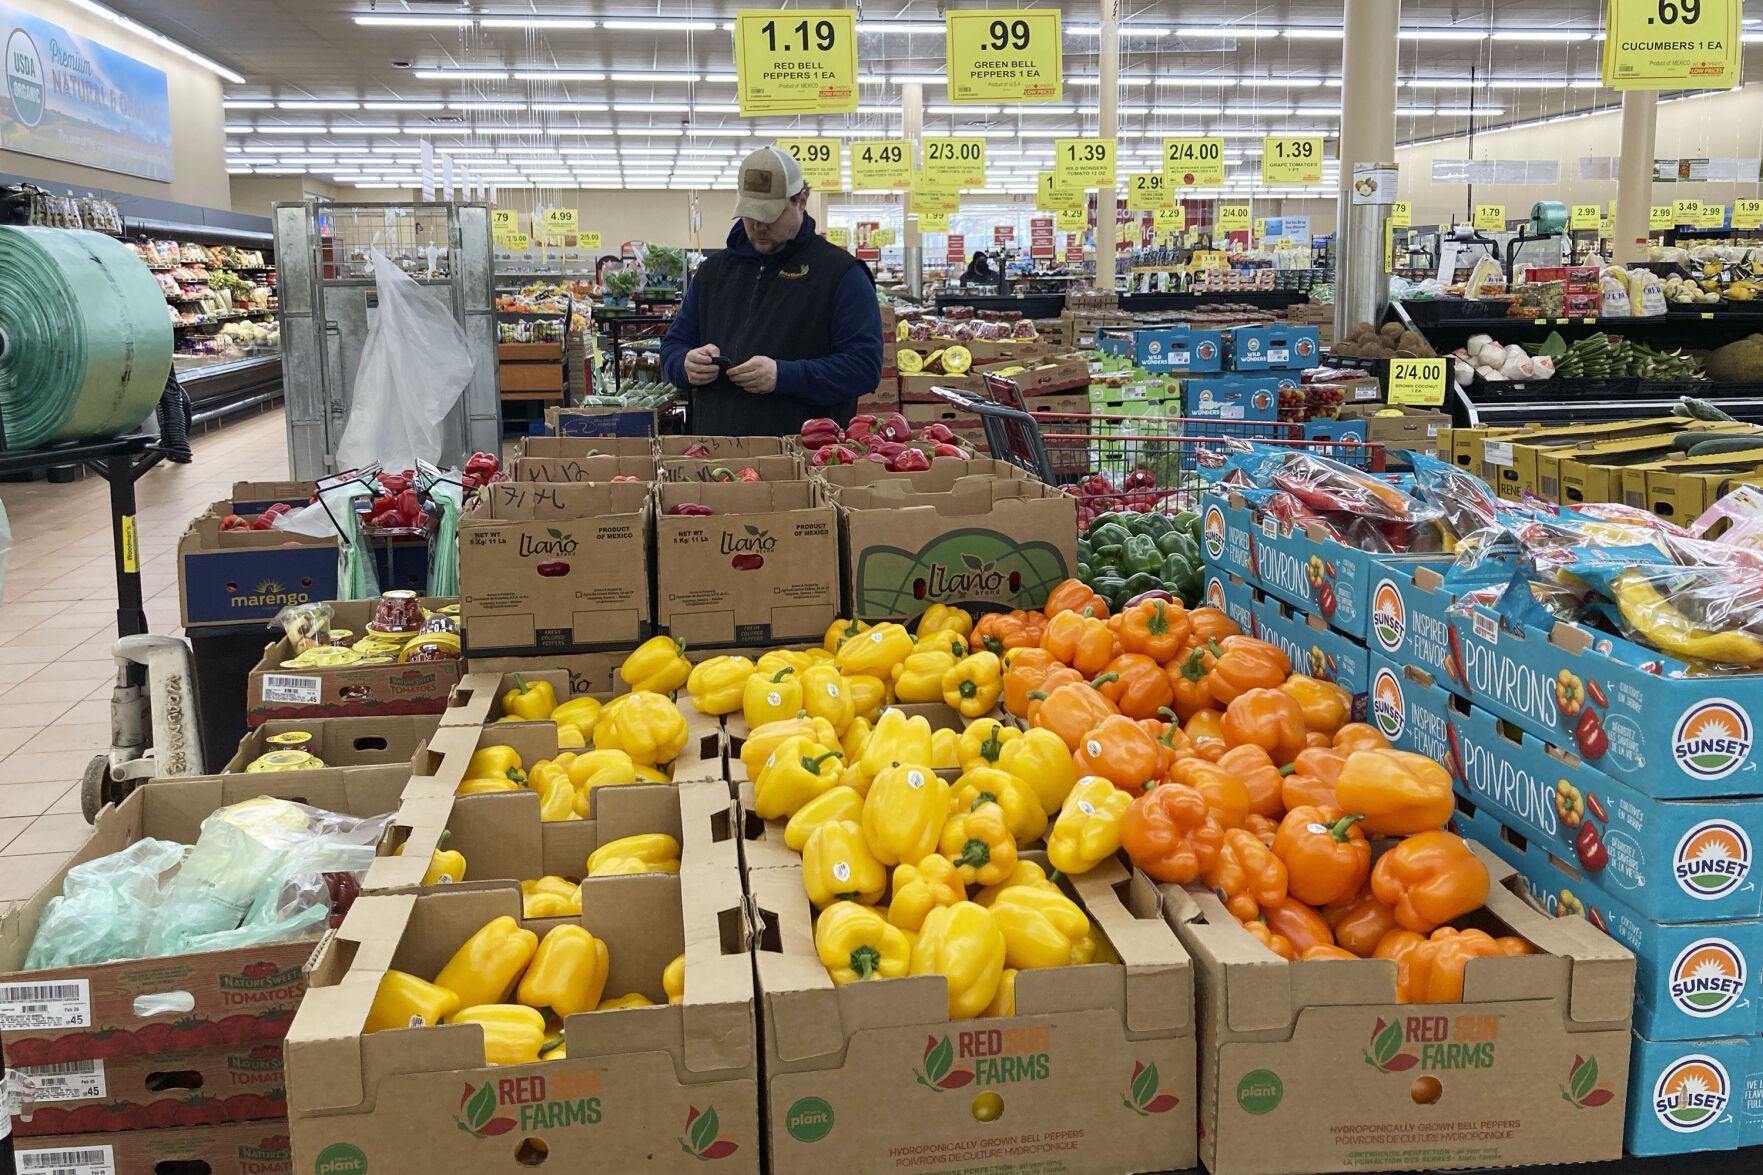 <p>File - A man shops at a grocery store in Buffalo Grove, Ill., March 19, 2023. As household expenses outpace earnings, many people are expressing concern about their financial futures. (AP Photo/Nam Y. Huh, File)</p>   PHOTO CREDIT: Nam Y. Huh - staff, ASSOCIATED PRESS